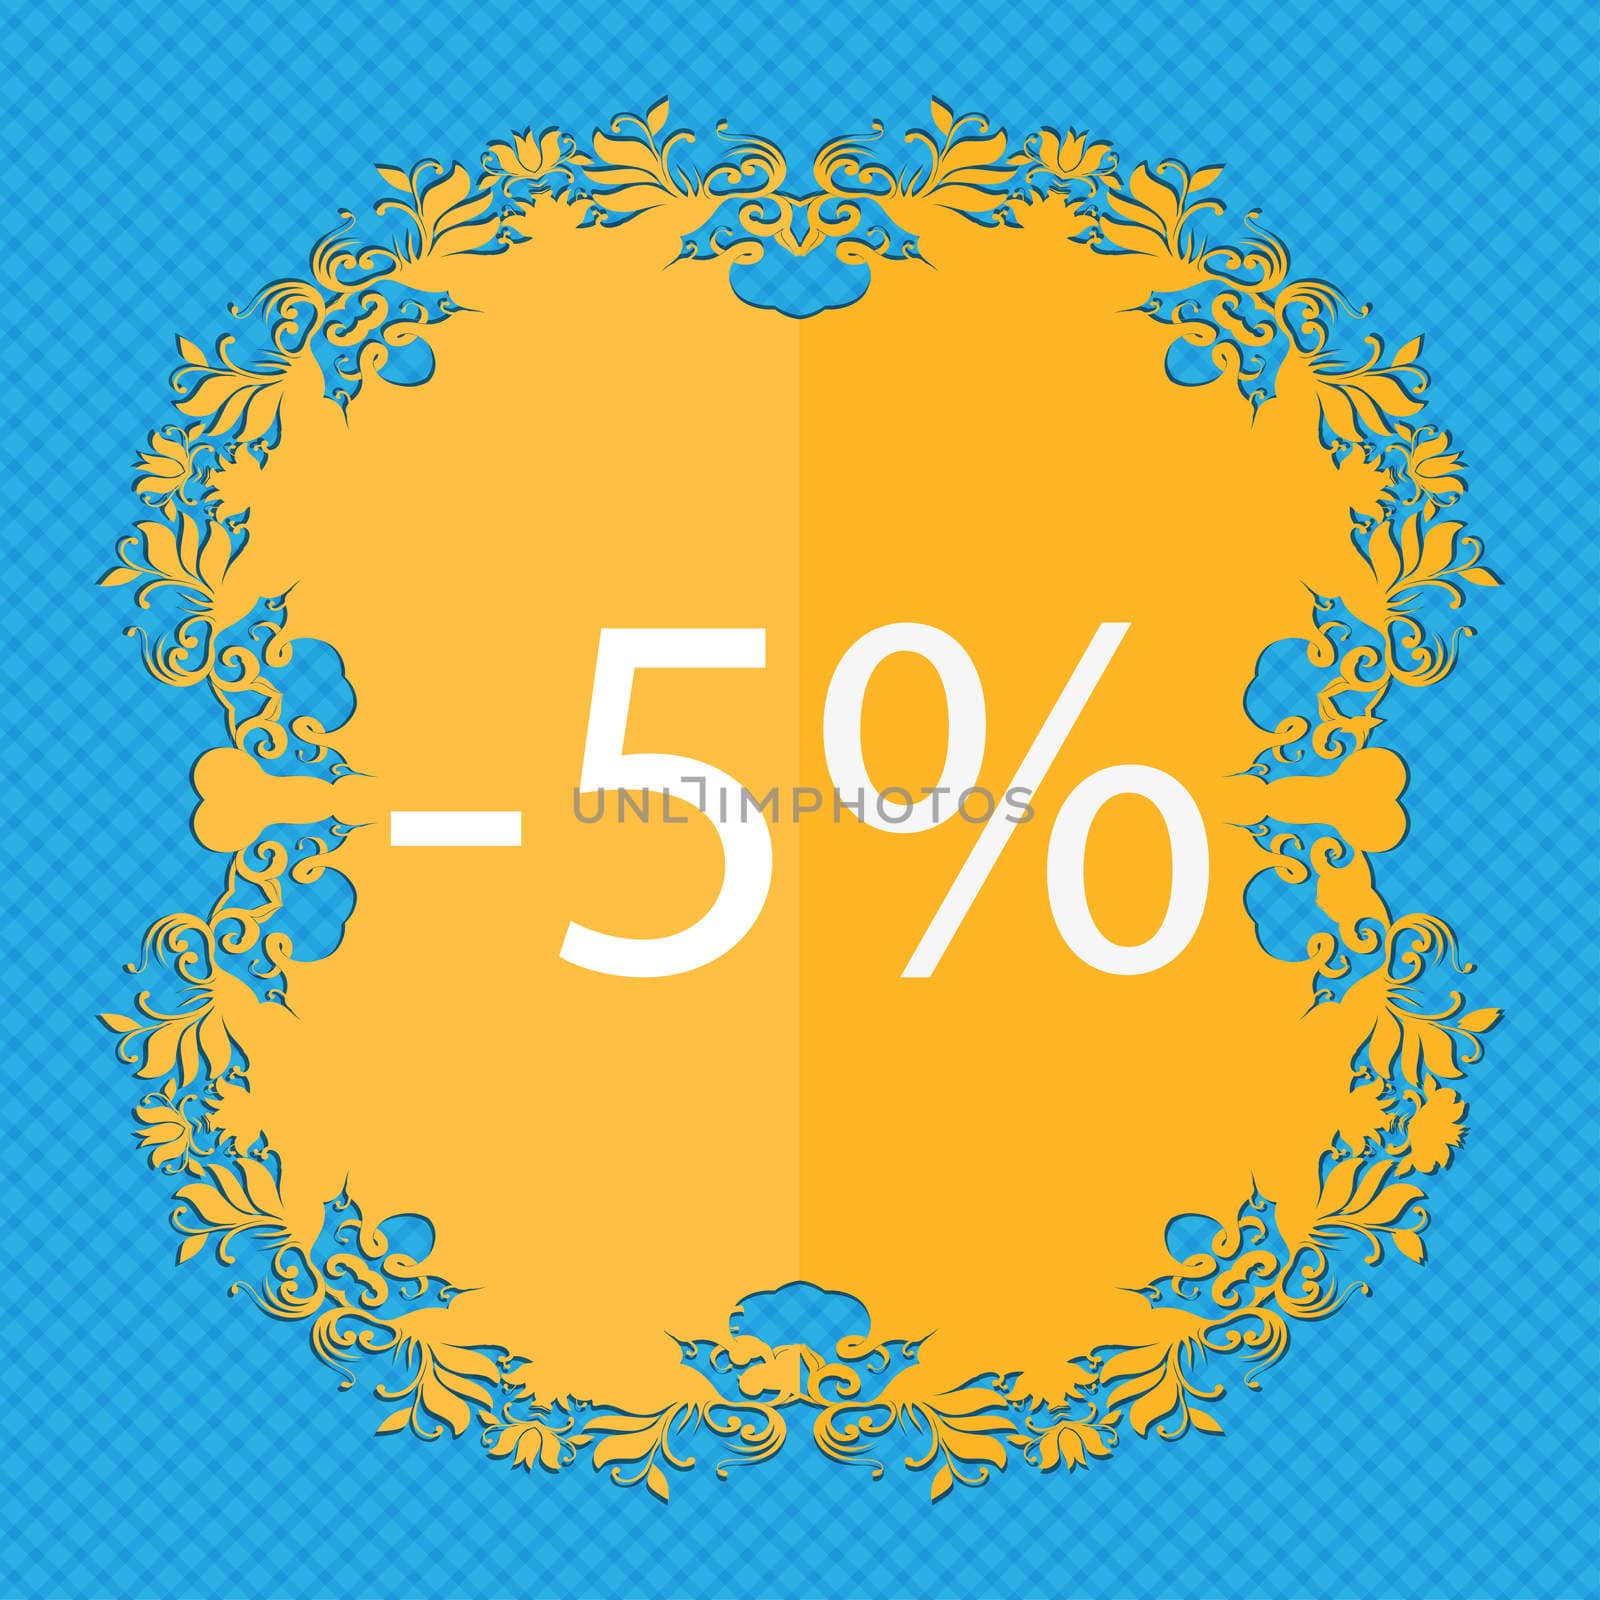 5 percent discount sign icon. Sale symbol. Special offer label. Floral flat design on a blue abstract background with place for your text. illustration